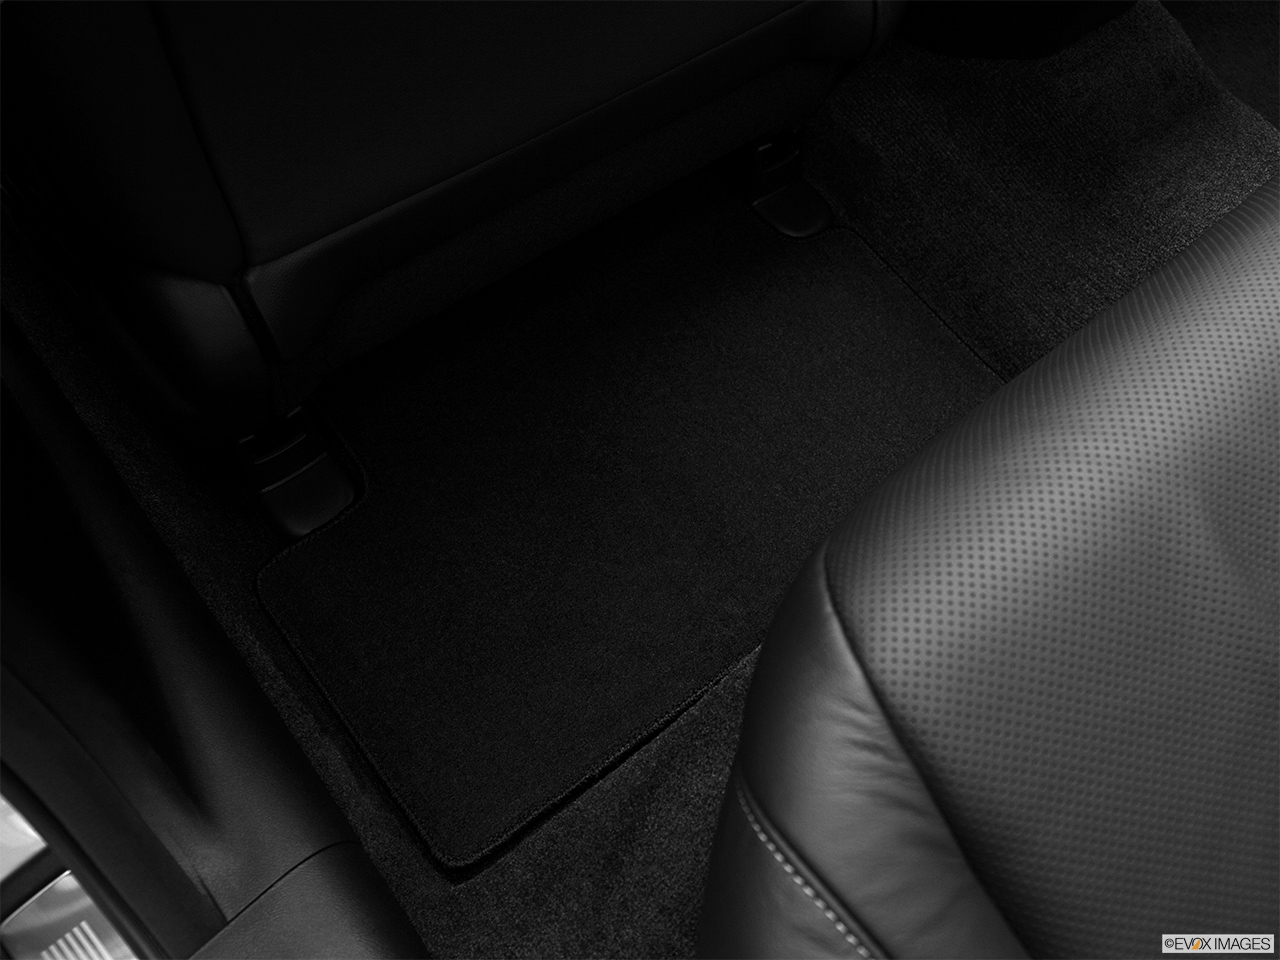 2012 Acura TSX 5-Speed Automatic Rear driver's side floor mat. Mid-seat level from outside looking in. 